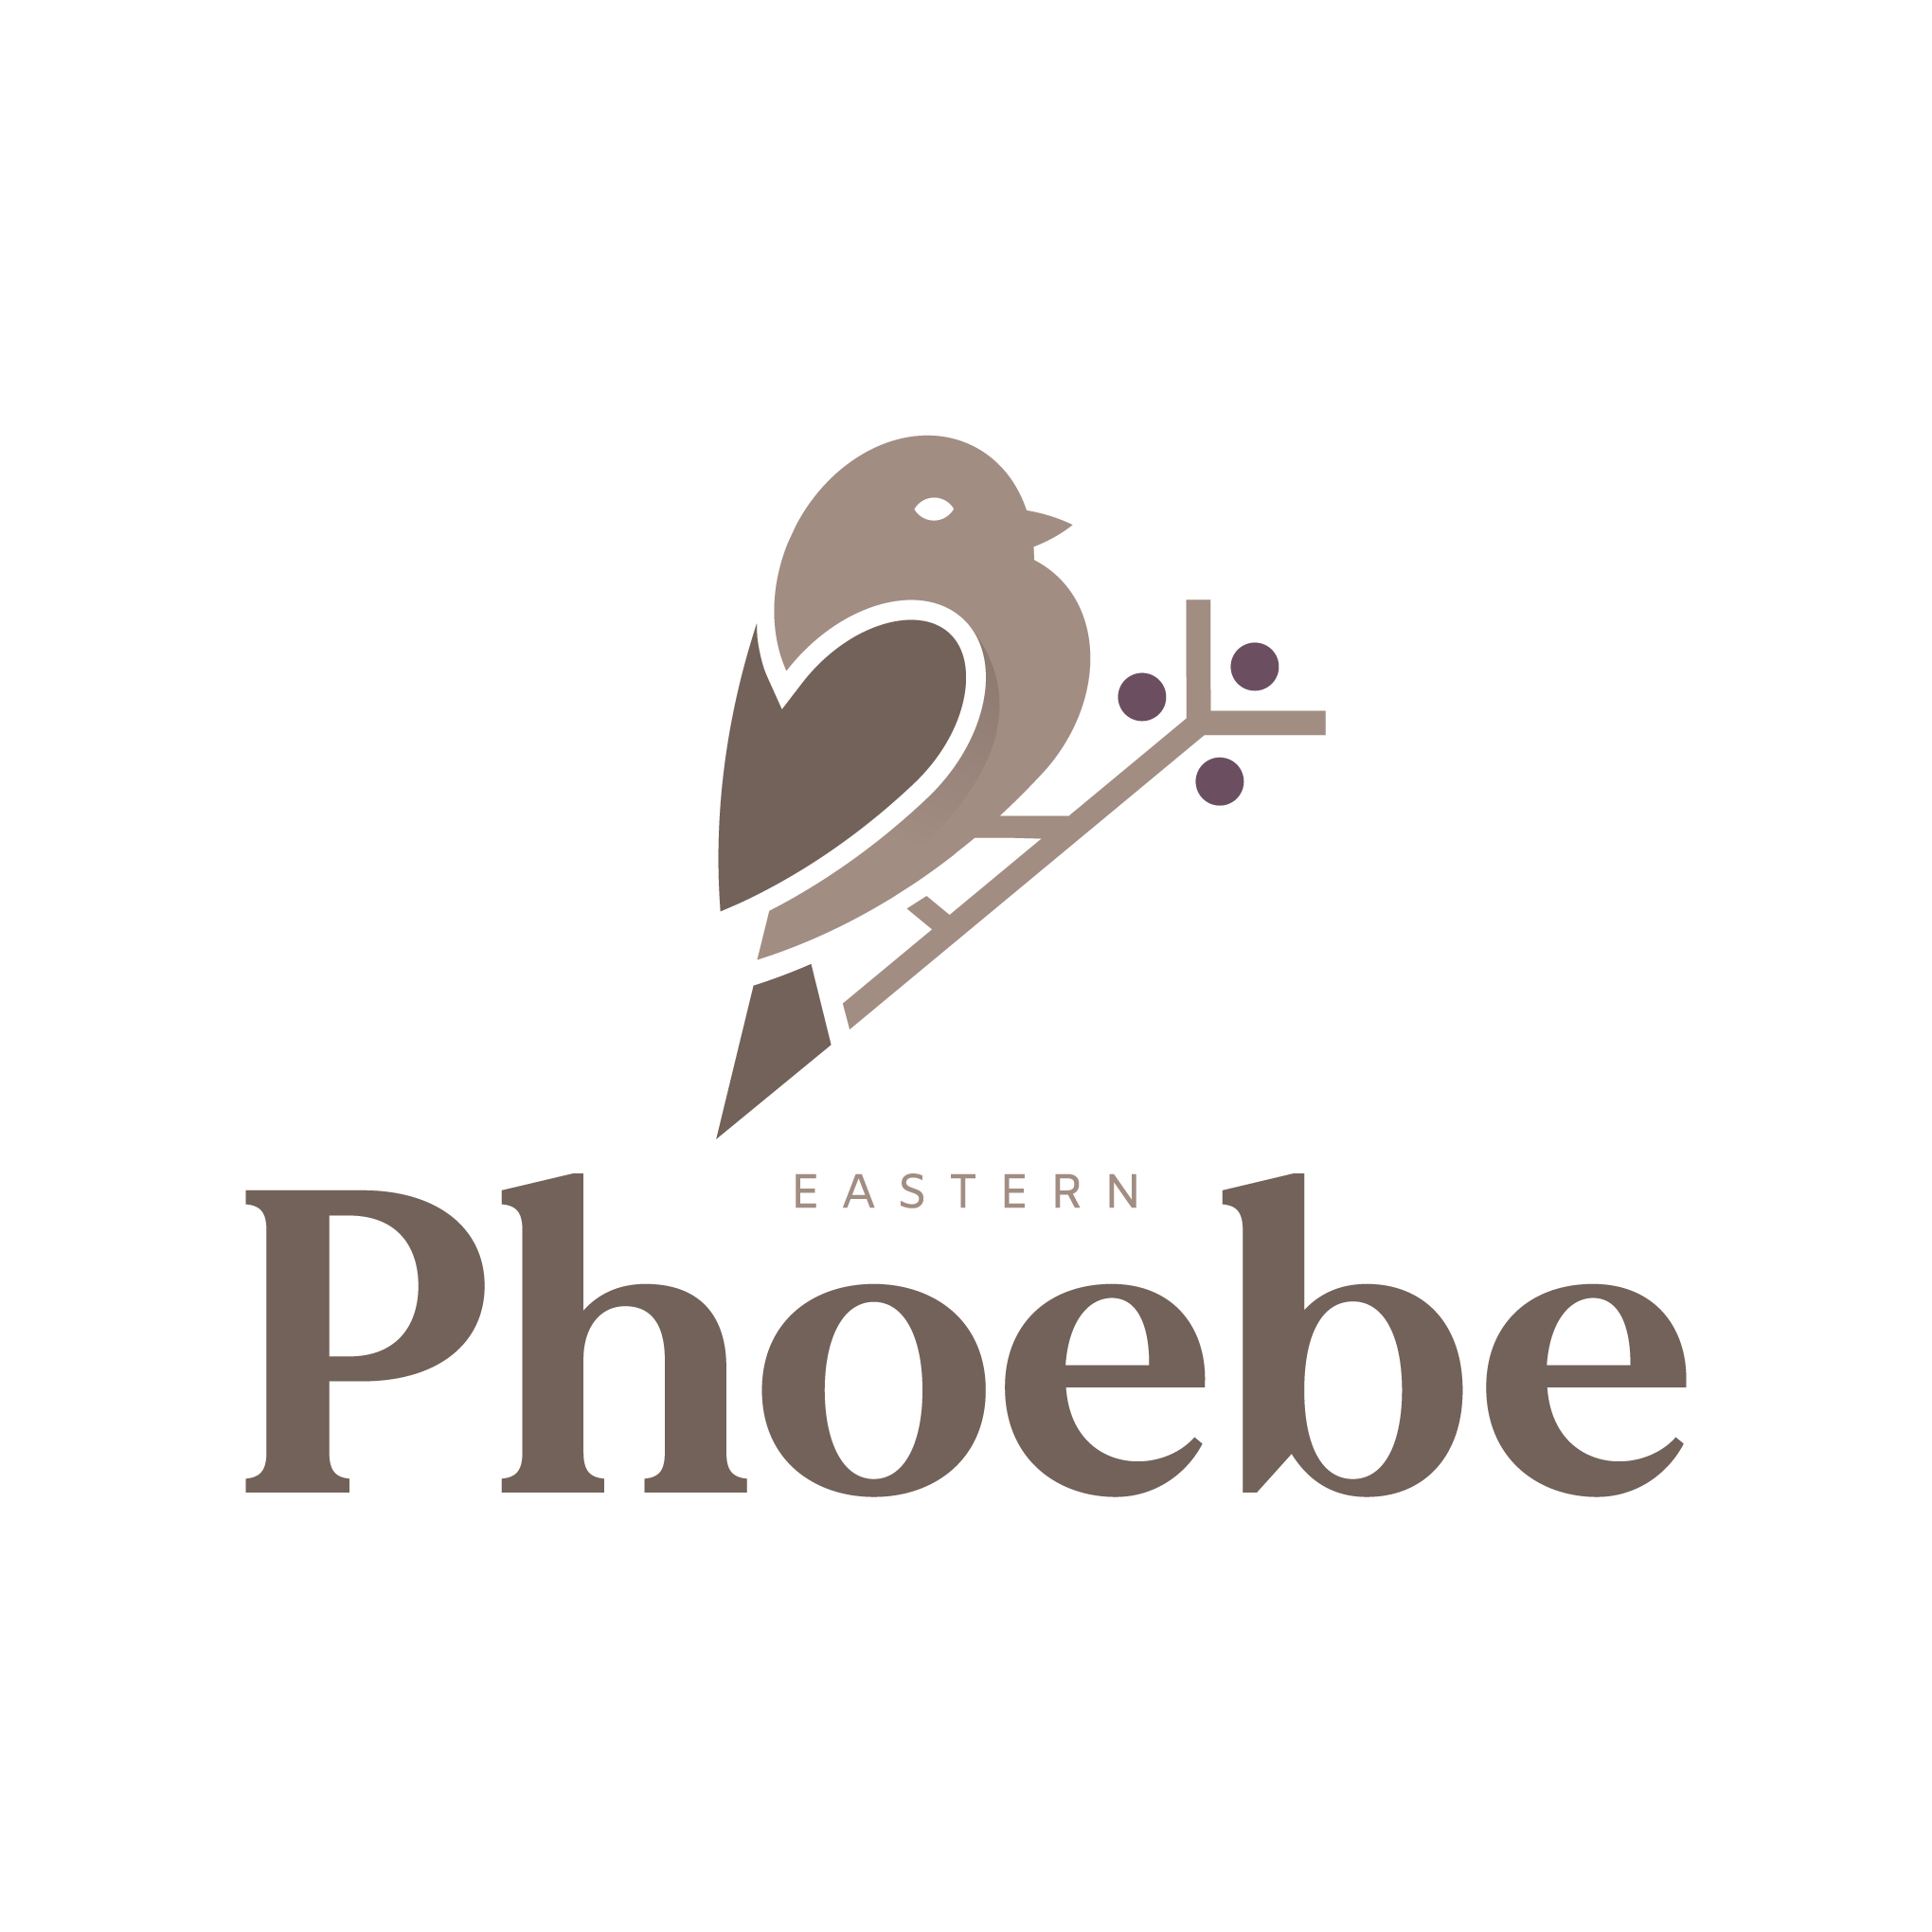 EASTERN PHOEBE logo design by logo designer elbustudio for your inspiration and for the worlds largest logo competition